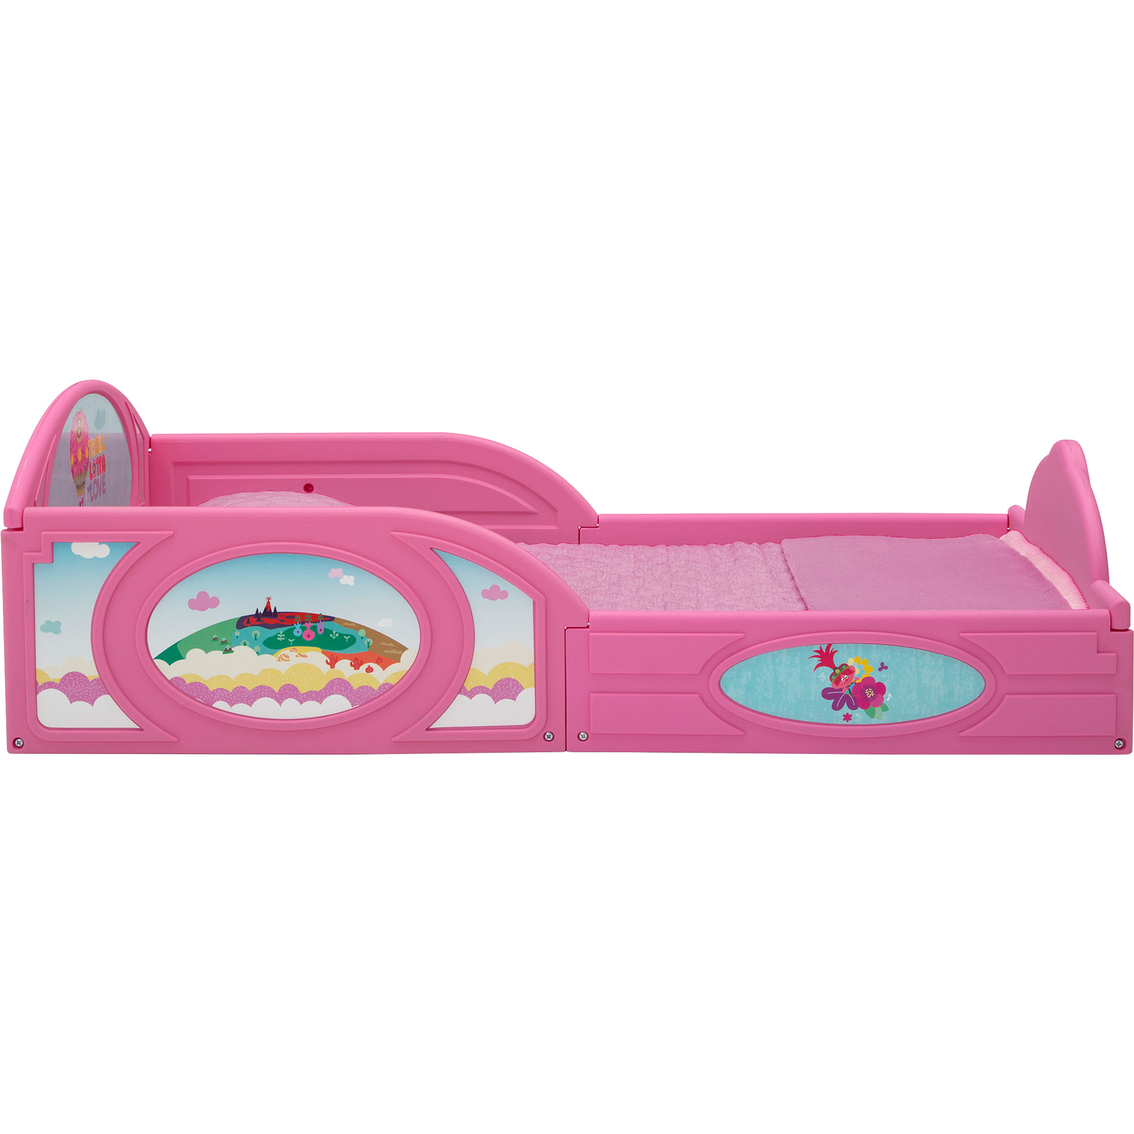 Delta Children Trolls World Tour Plastic Sleep and Play Toddler Bed - Image 3 of 9